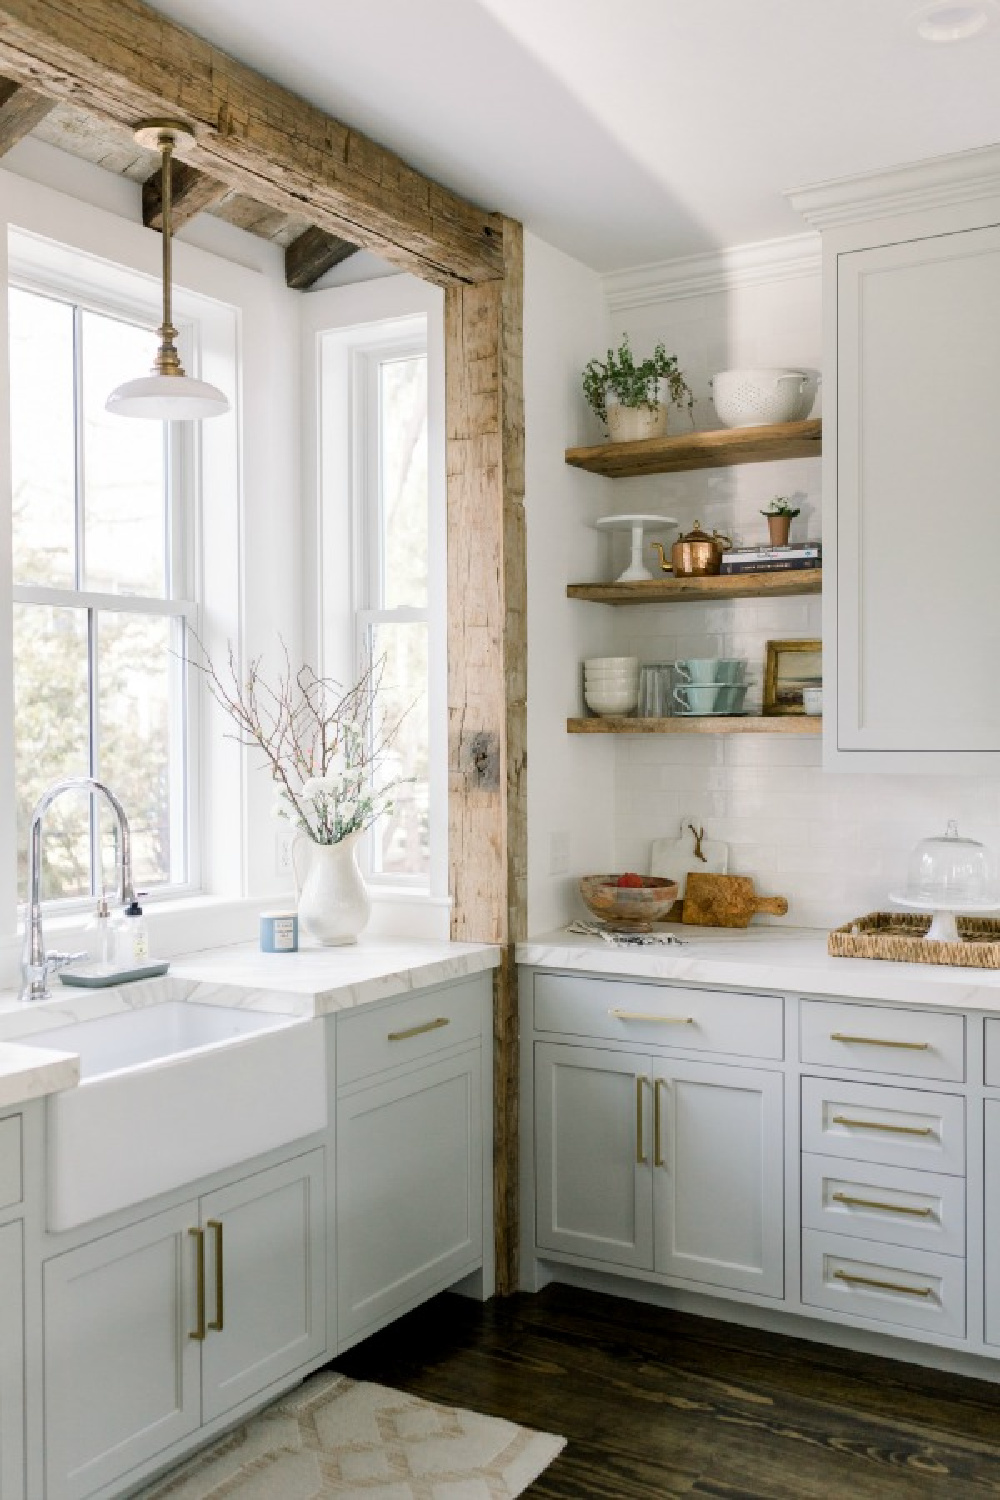 Inspired Kitchens on Instagram: “I love kitchens with the farmhouse sink.  Love the checkered w…